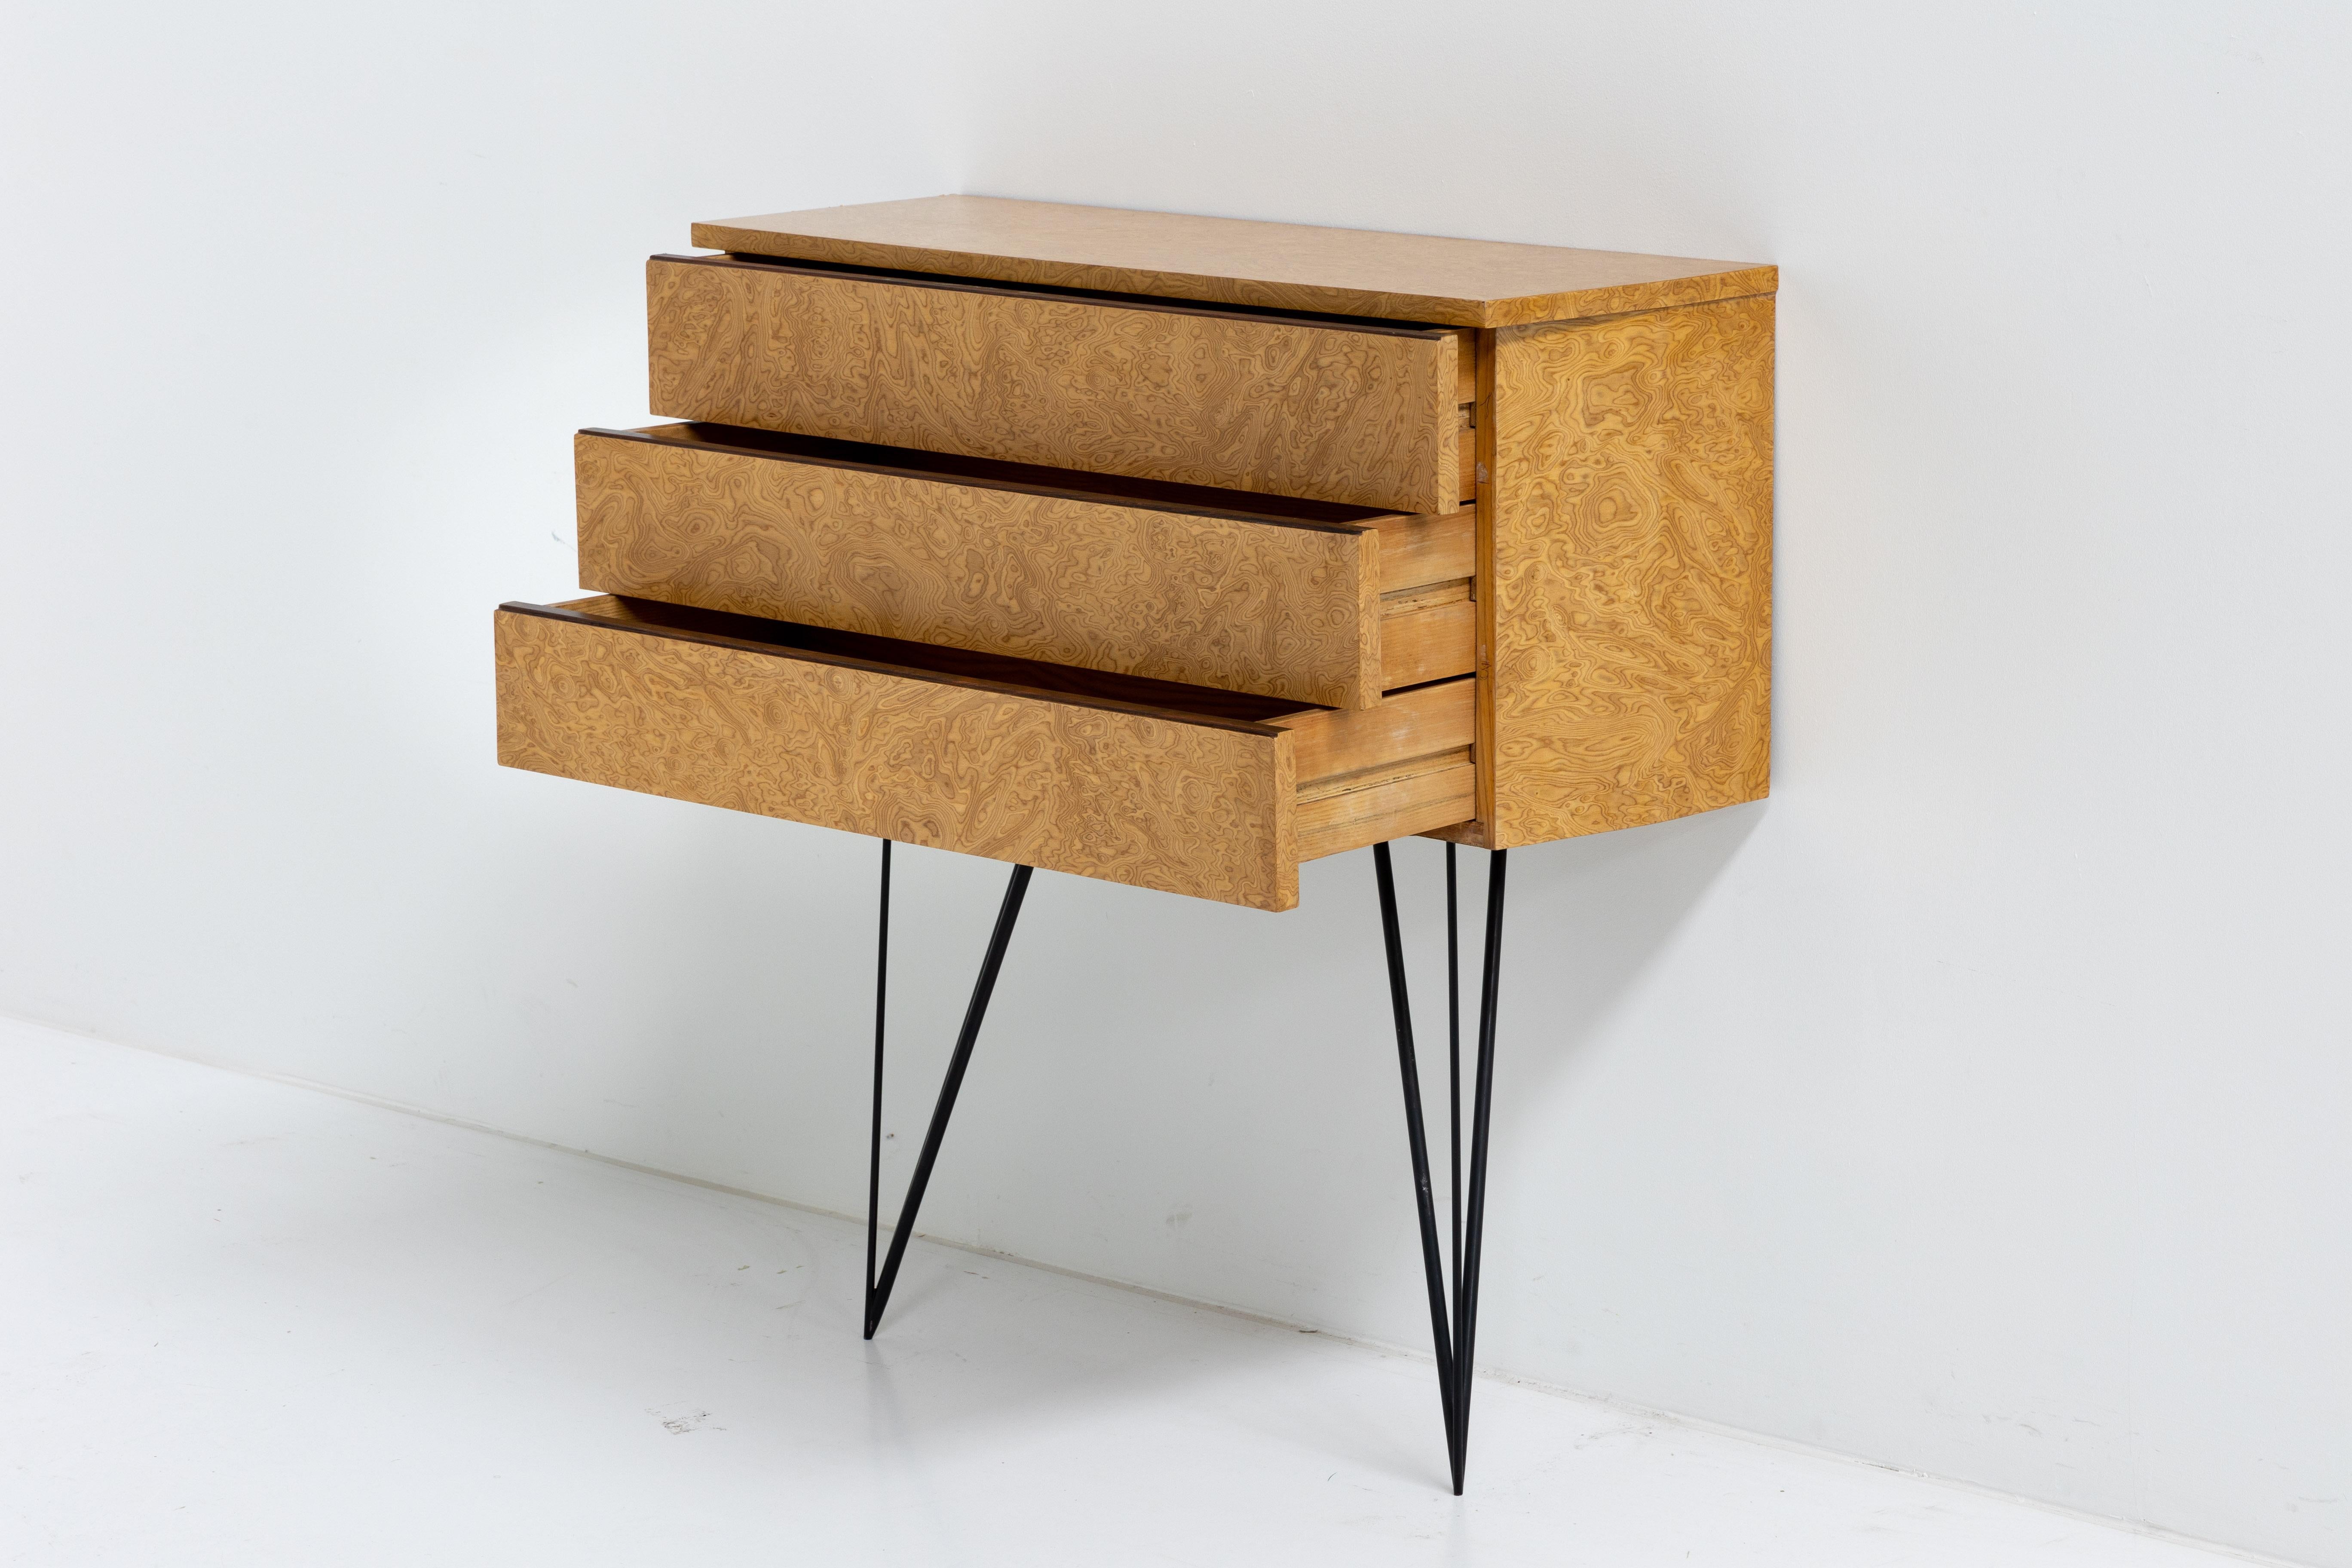 Wood Gio Ponti Style Cabinet, Italy, 1950s For Sale